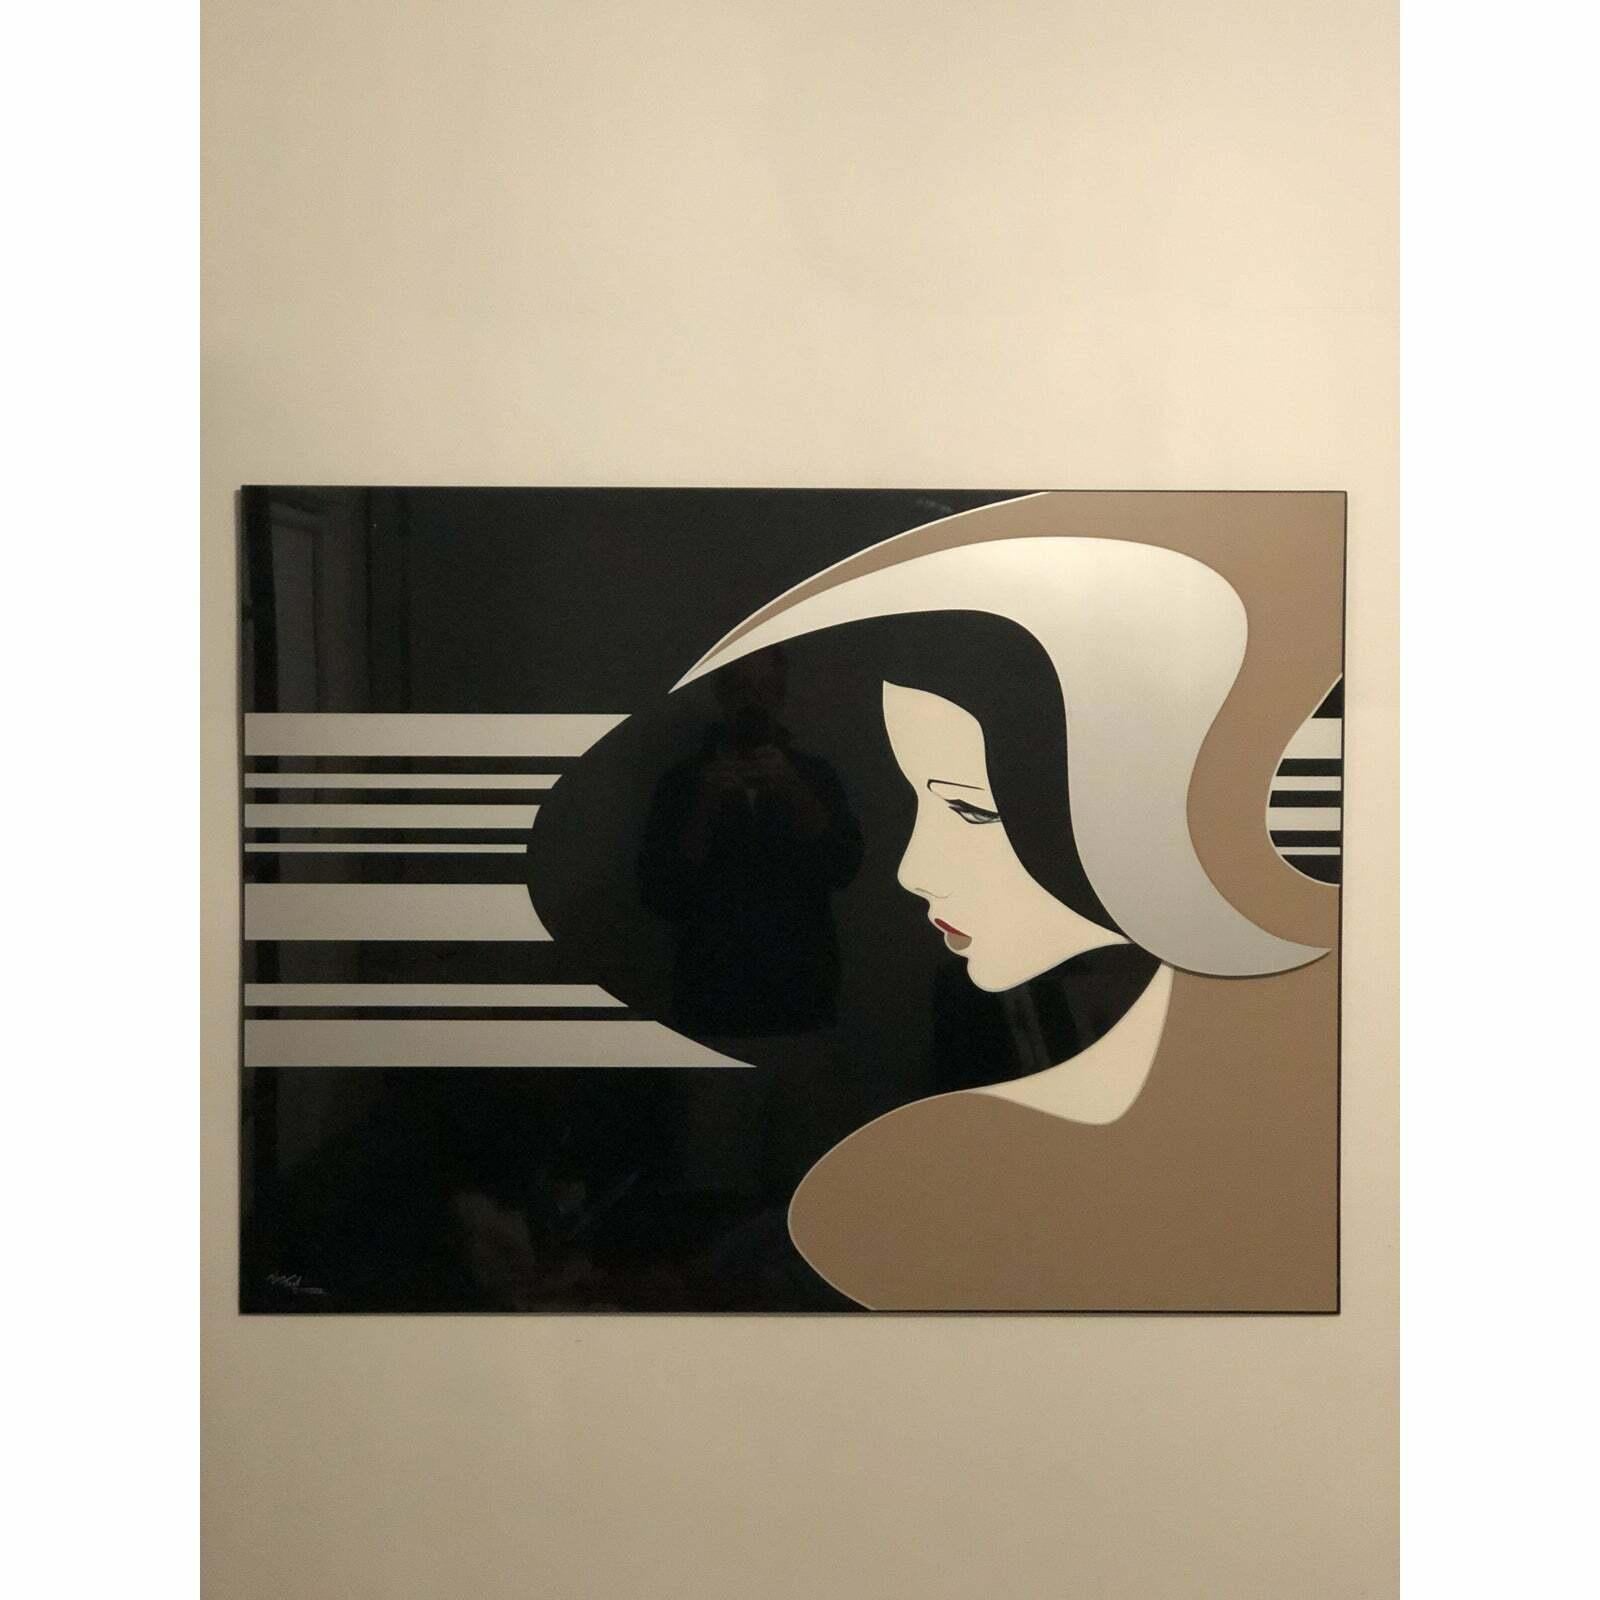 Superb acrylic wall hanging by Van Teal. Artist Orlando Acosta captures the 70s & 80s with great subject and movement.
3D affect with raised hood.